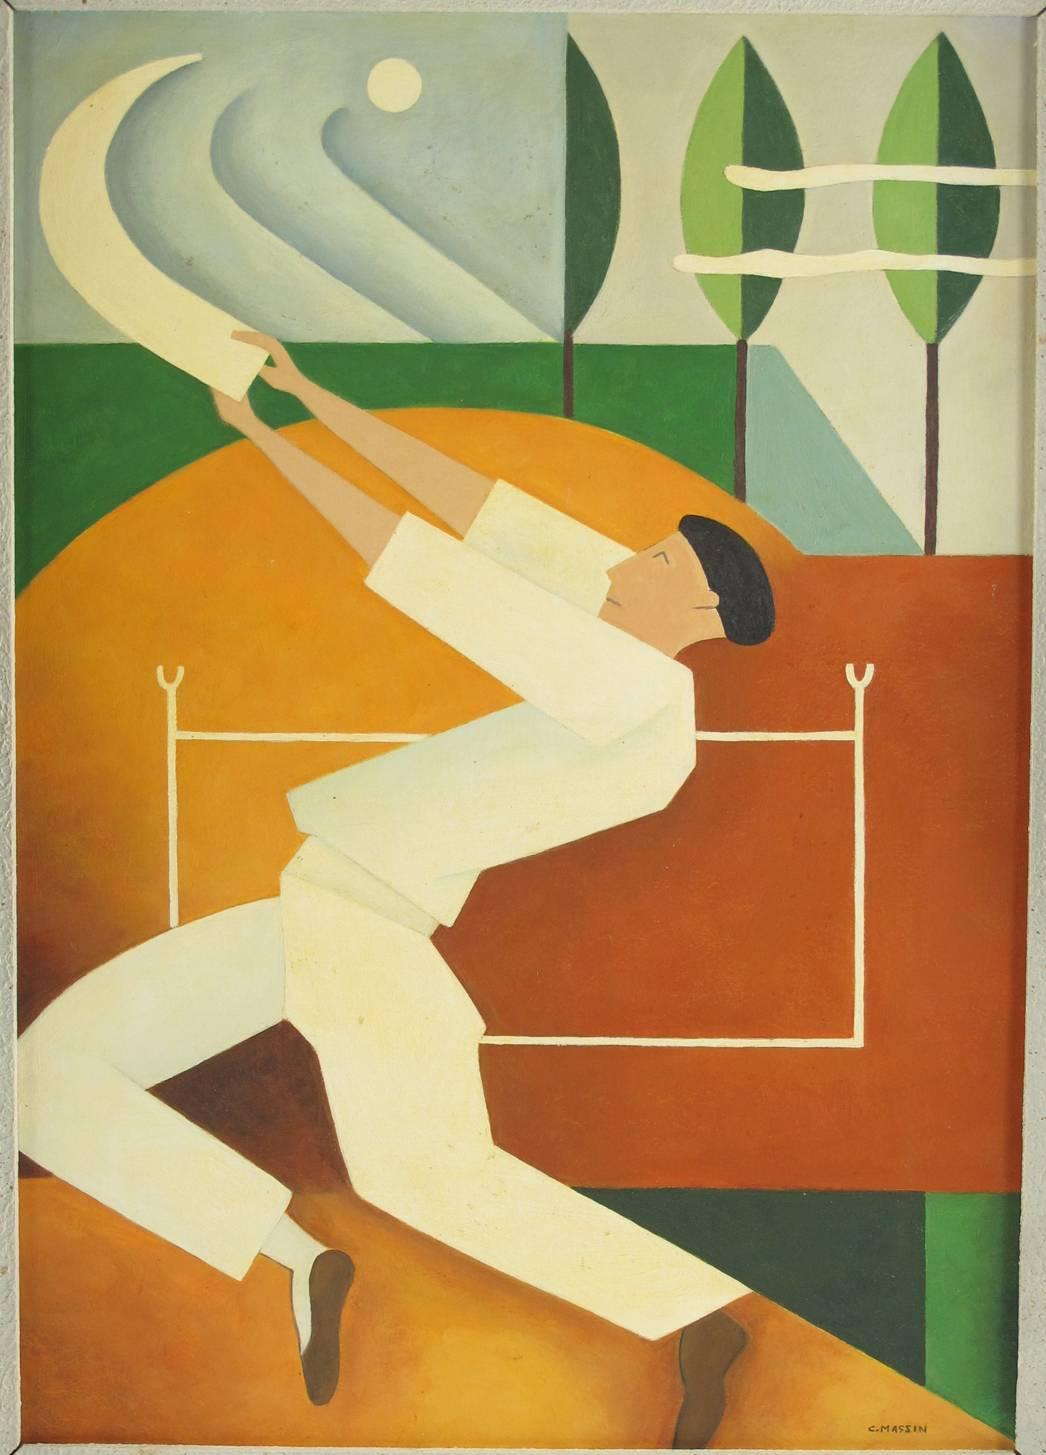 Stunning French Art Deco cubist gouache on cardboard in original frame by C. Massin. Signed on bottom right corner. Featuring a sportsman playing Jai Alai also called in Europe, Chistera or Pelote Basque. Very nice shades of warm colors in sienna,